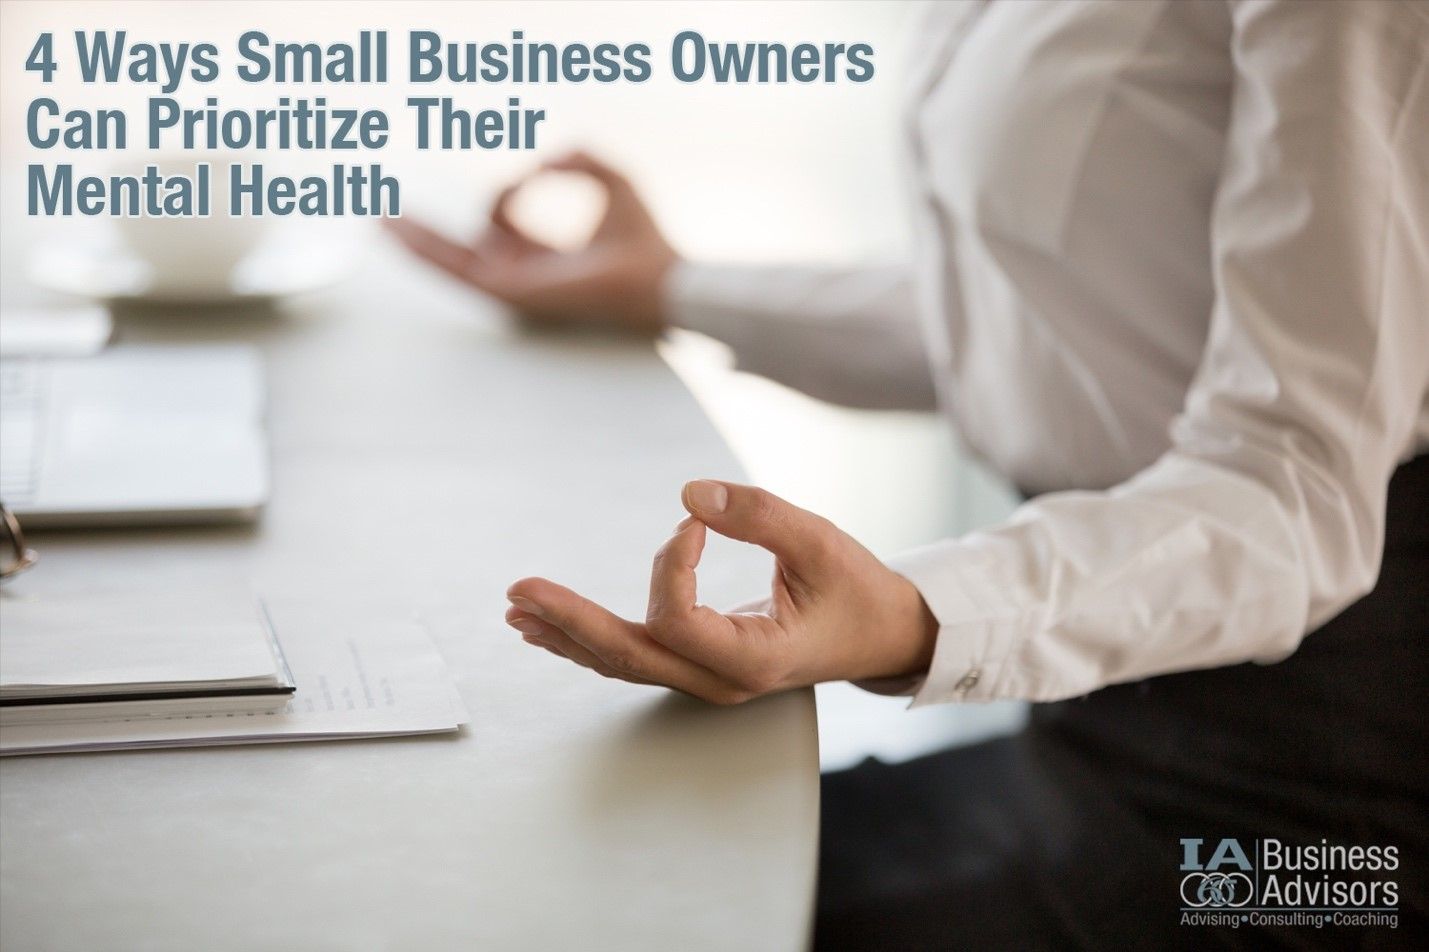 4 Ways Small Business Owners Can Prioritize Their Mental Health